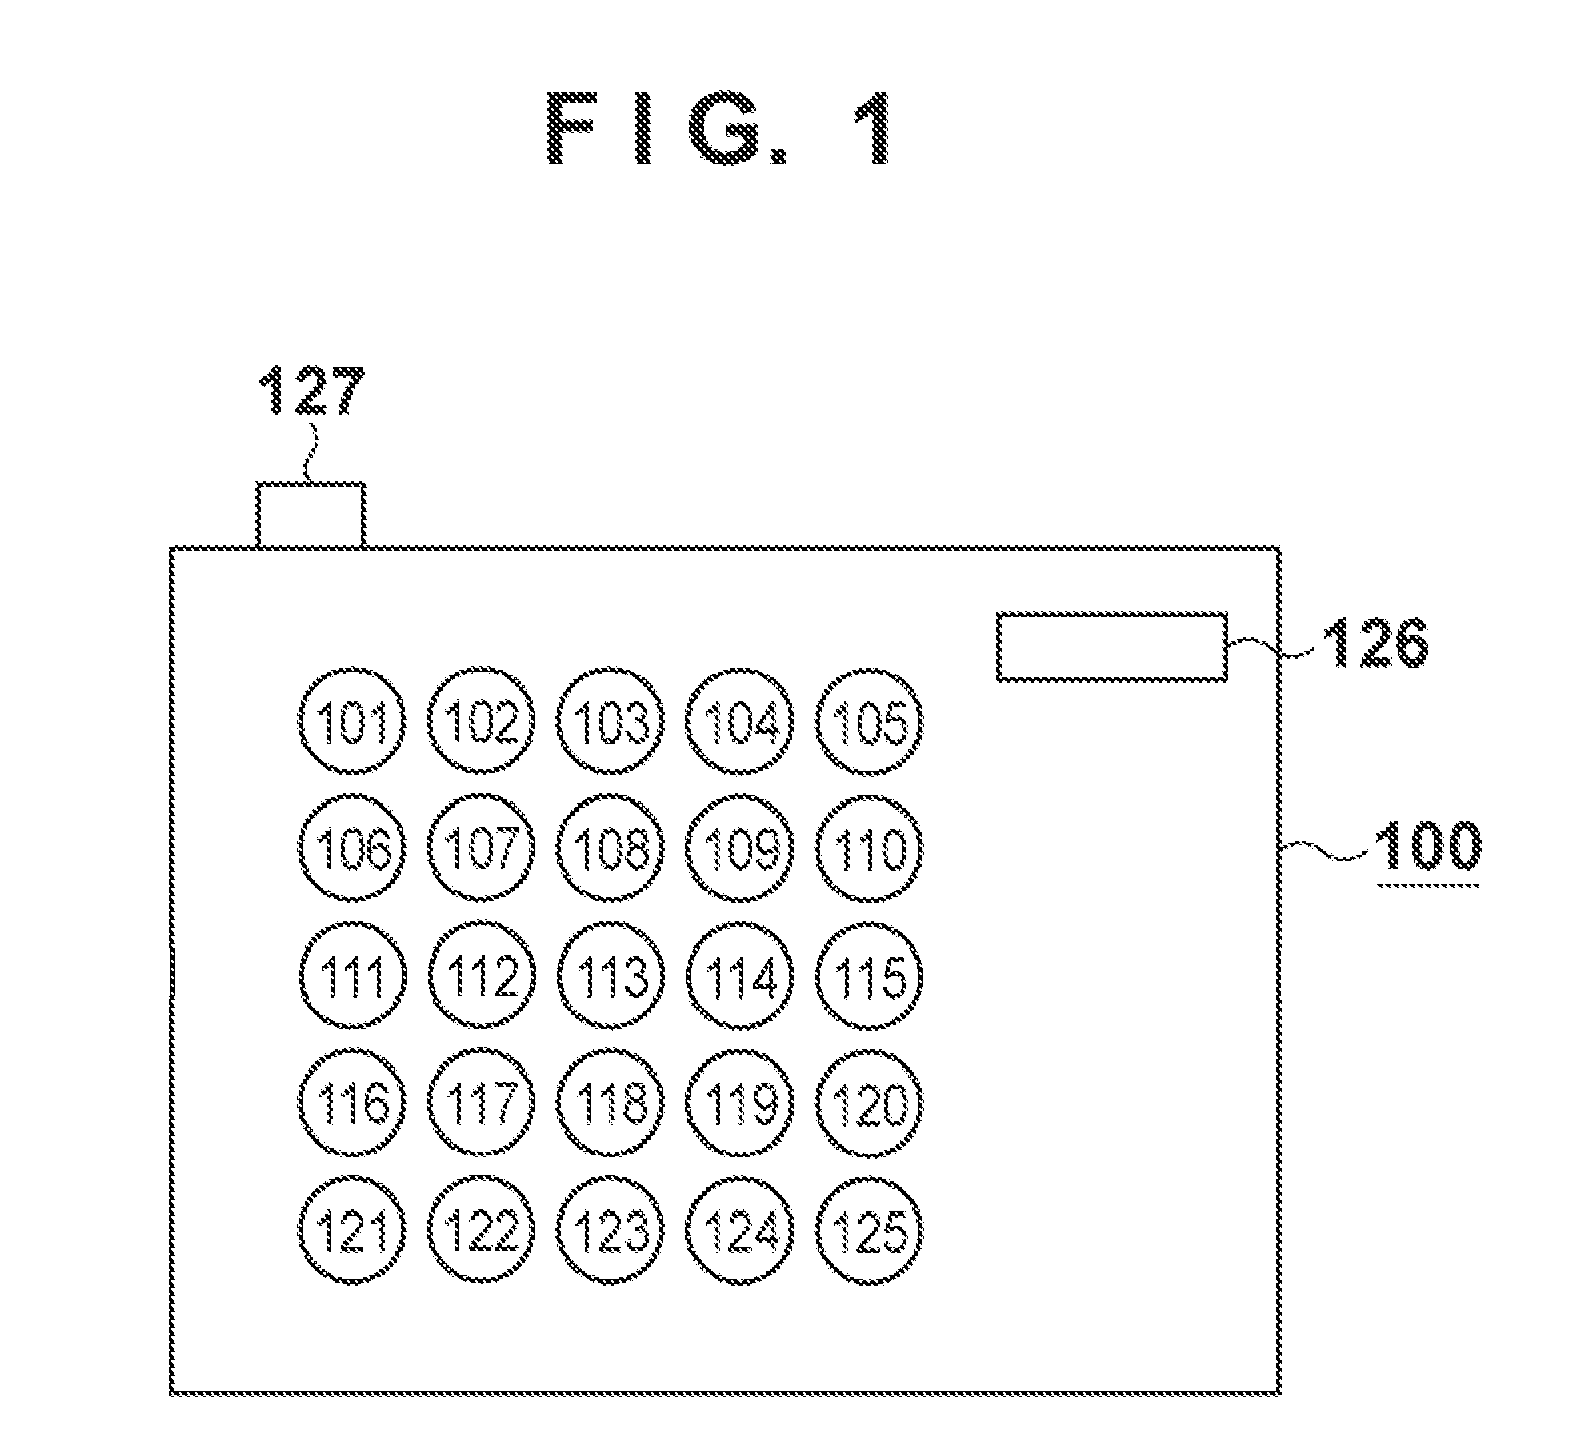 Image processing apparatus and method thereof